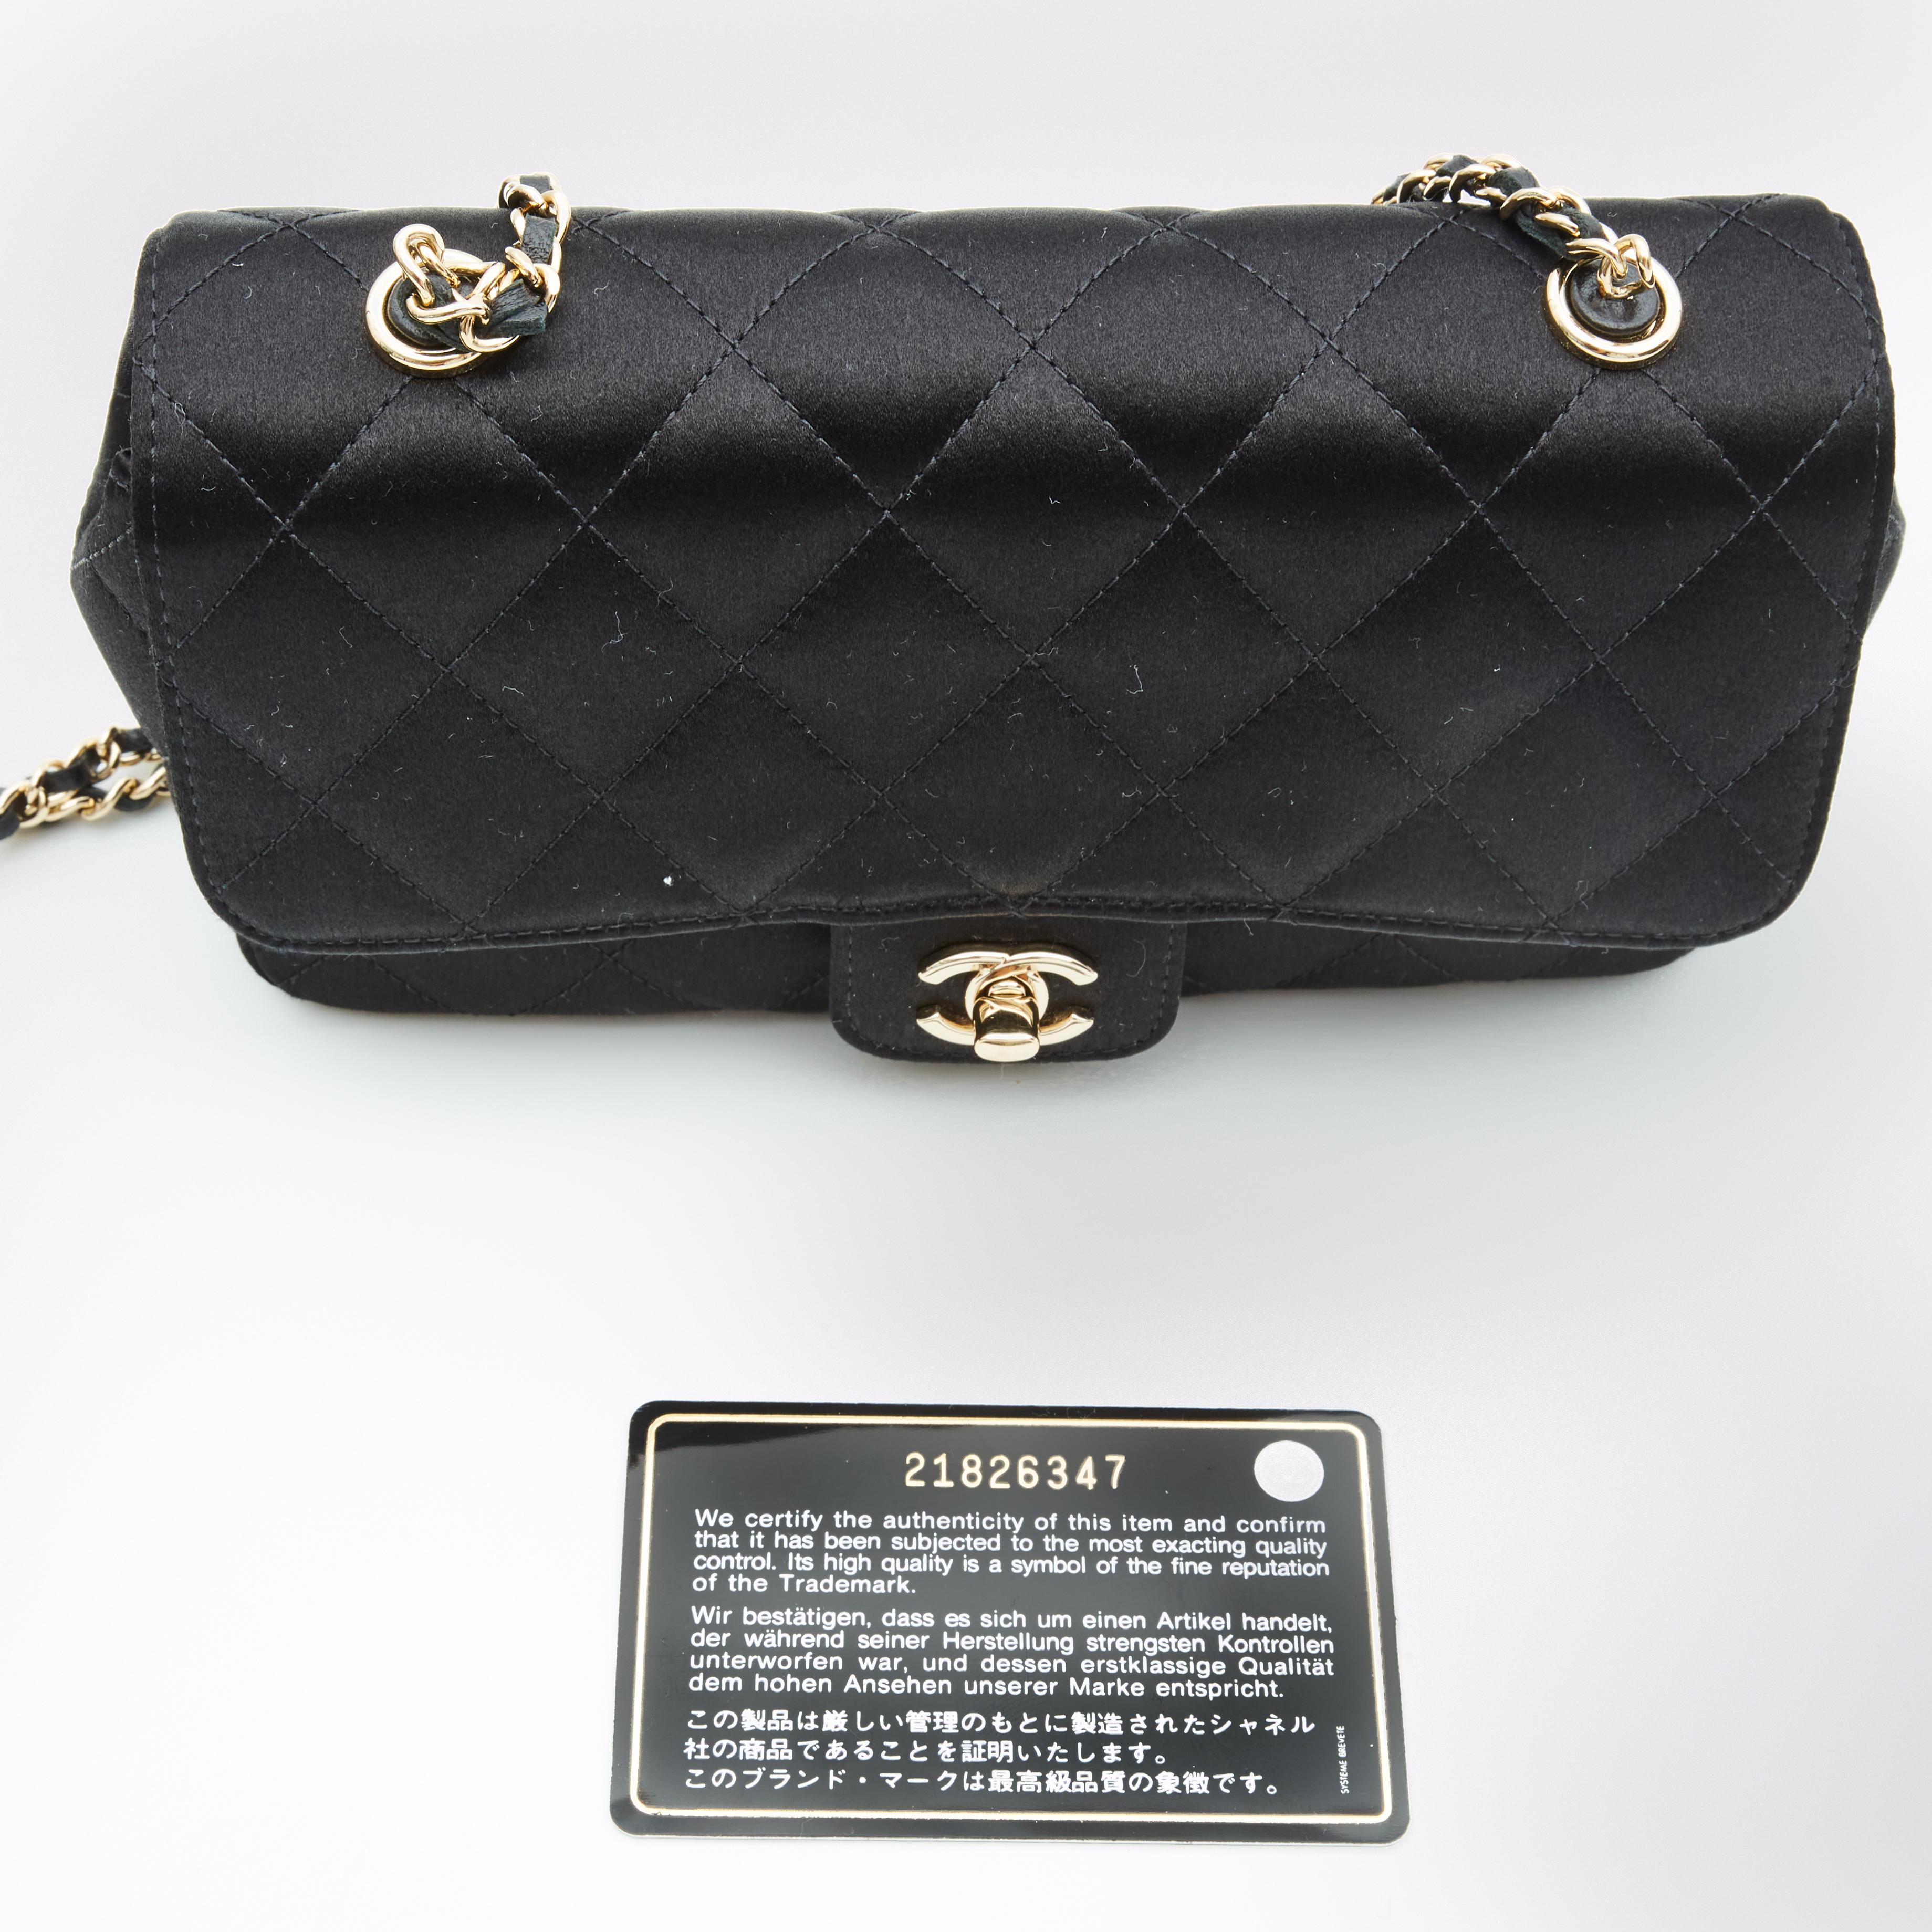 Women's Chanel Black Quilted Satin Camellia Mini Flap Bag